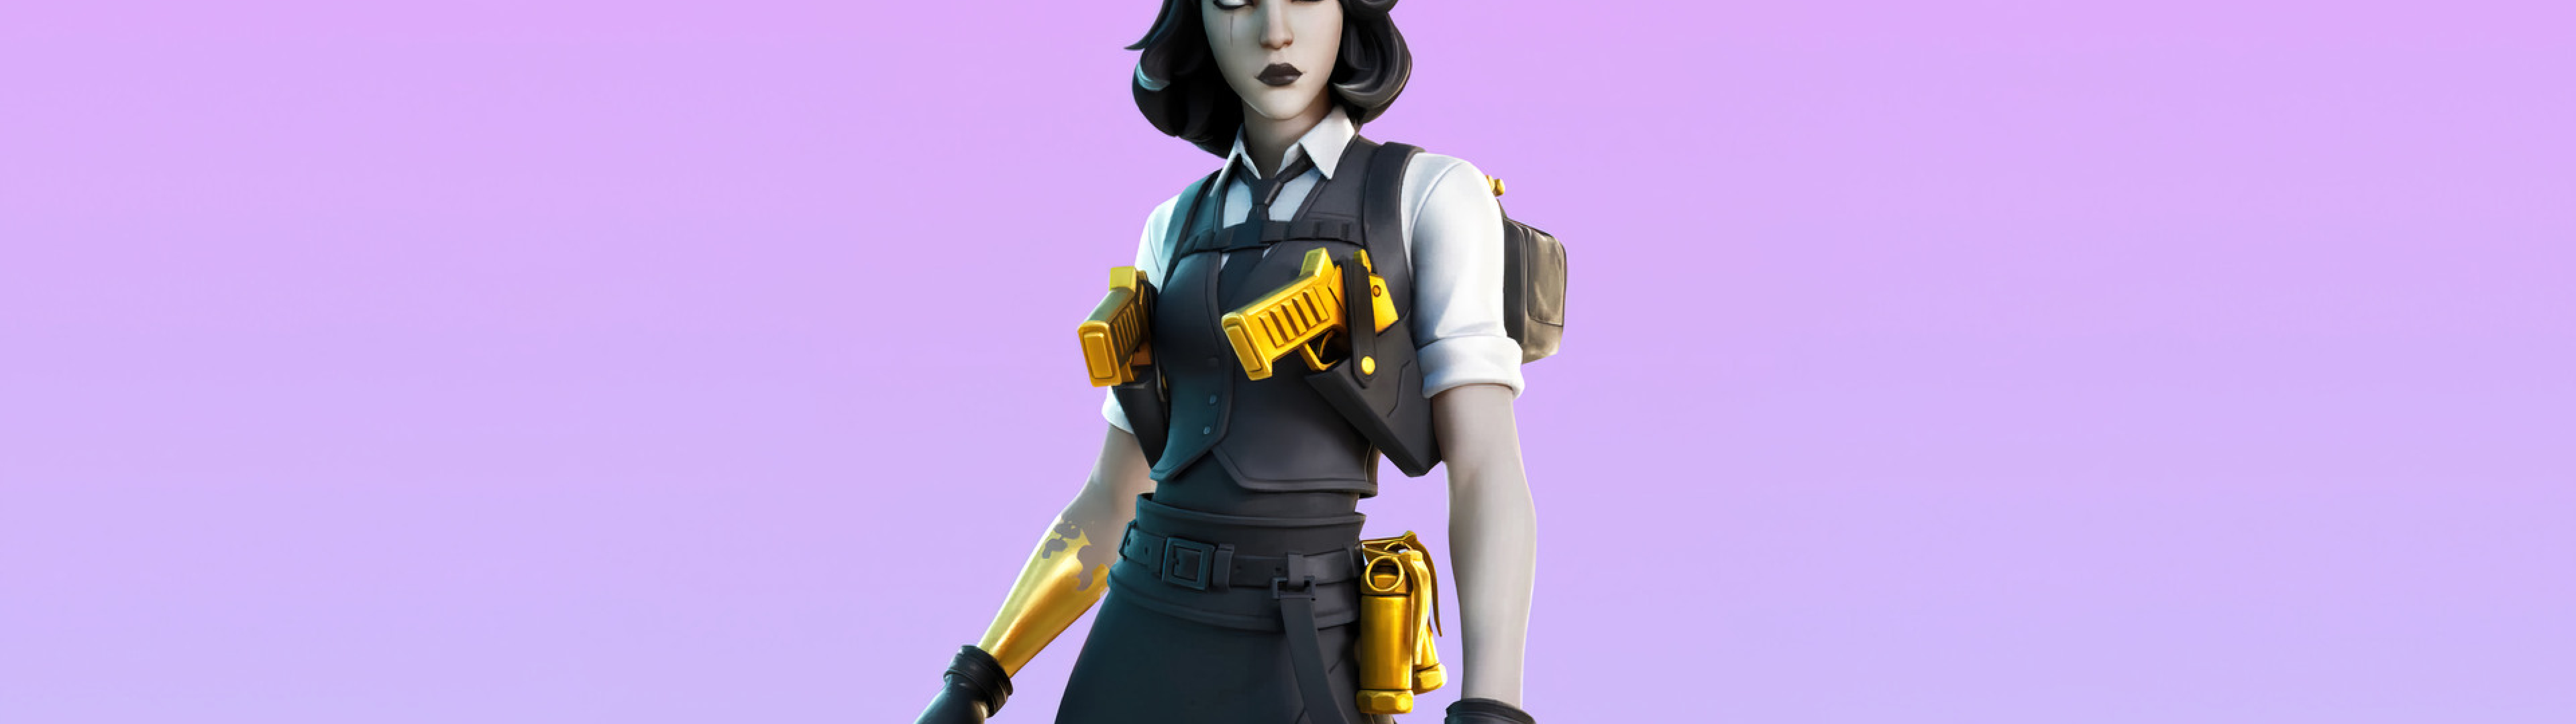 7680x2160 Resolution Fortnite Marigold Outfit Skin 7680x2160 Resolution ...